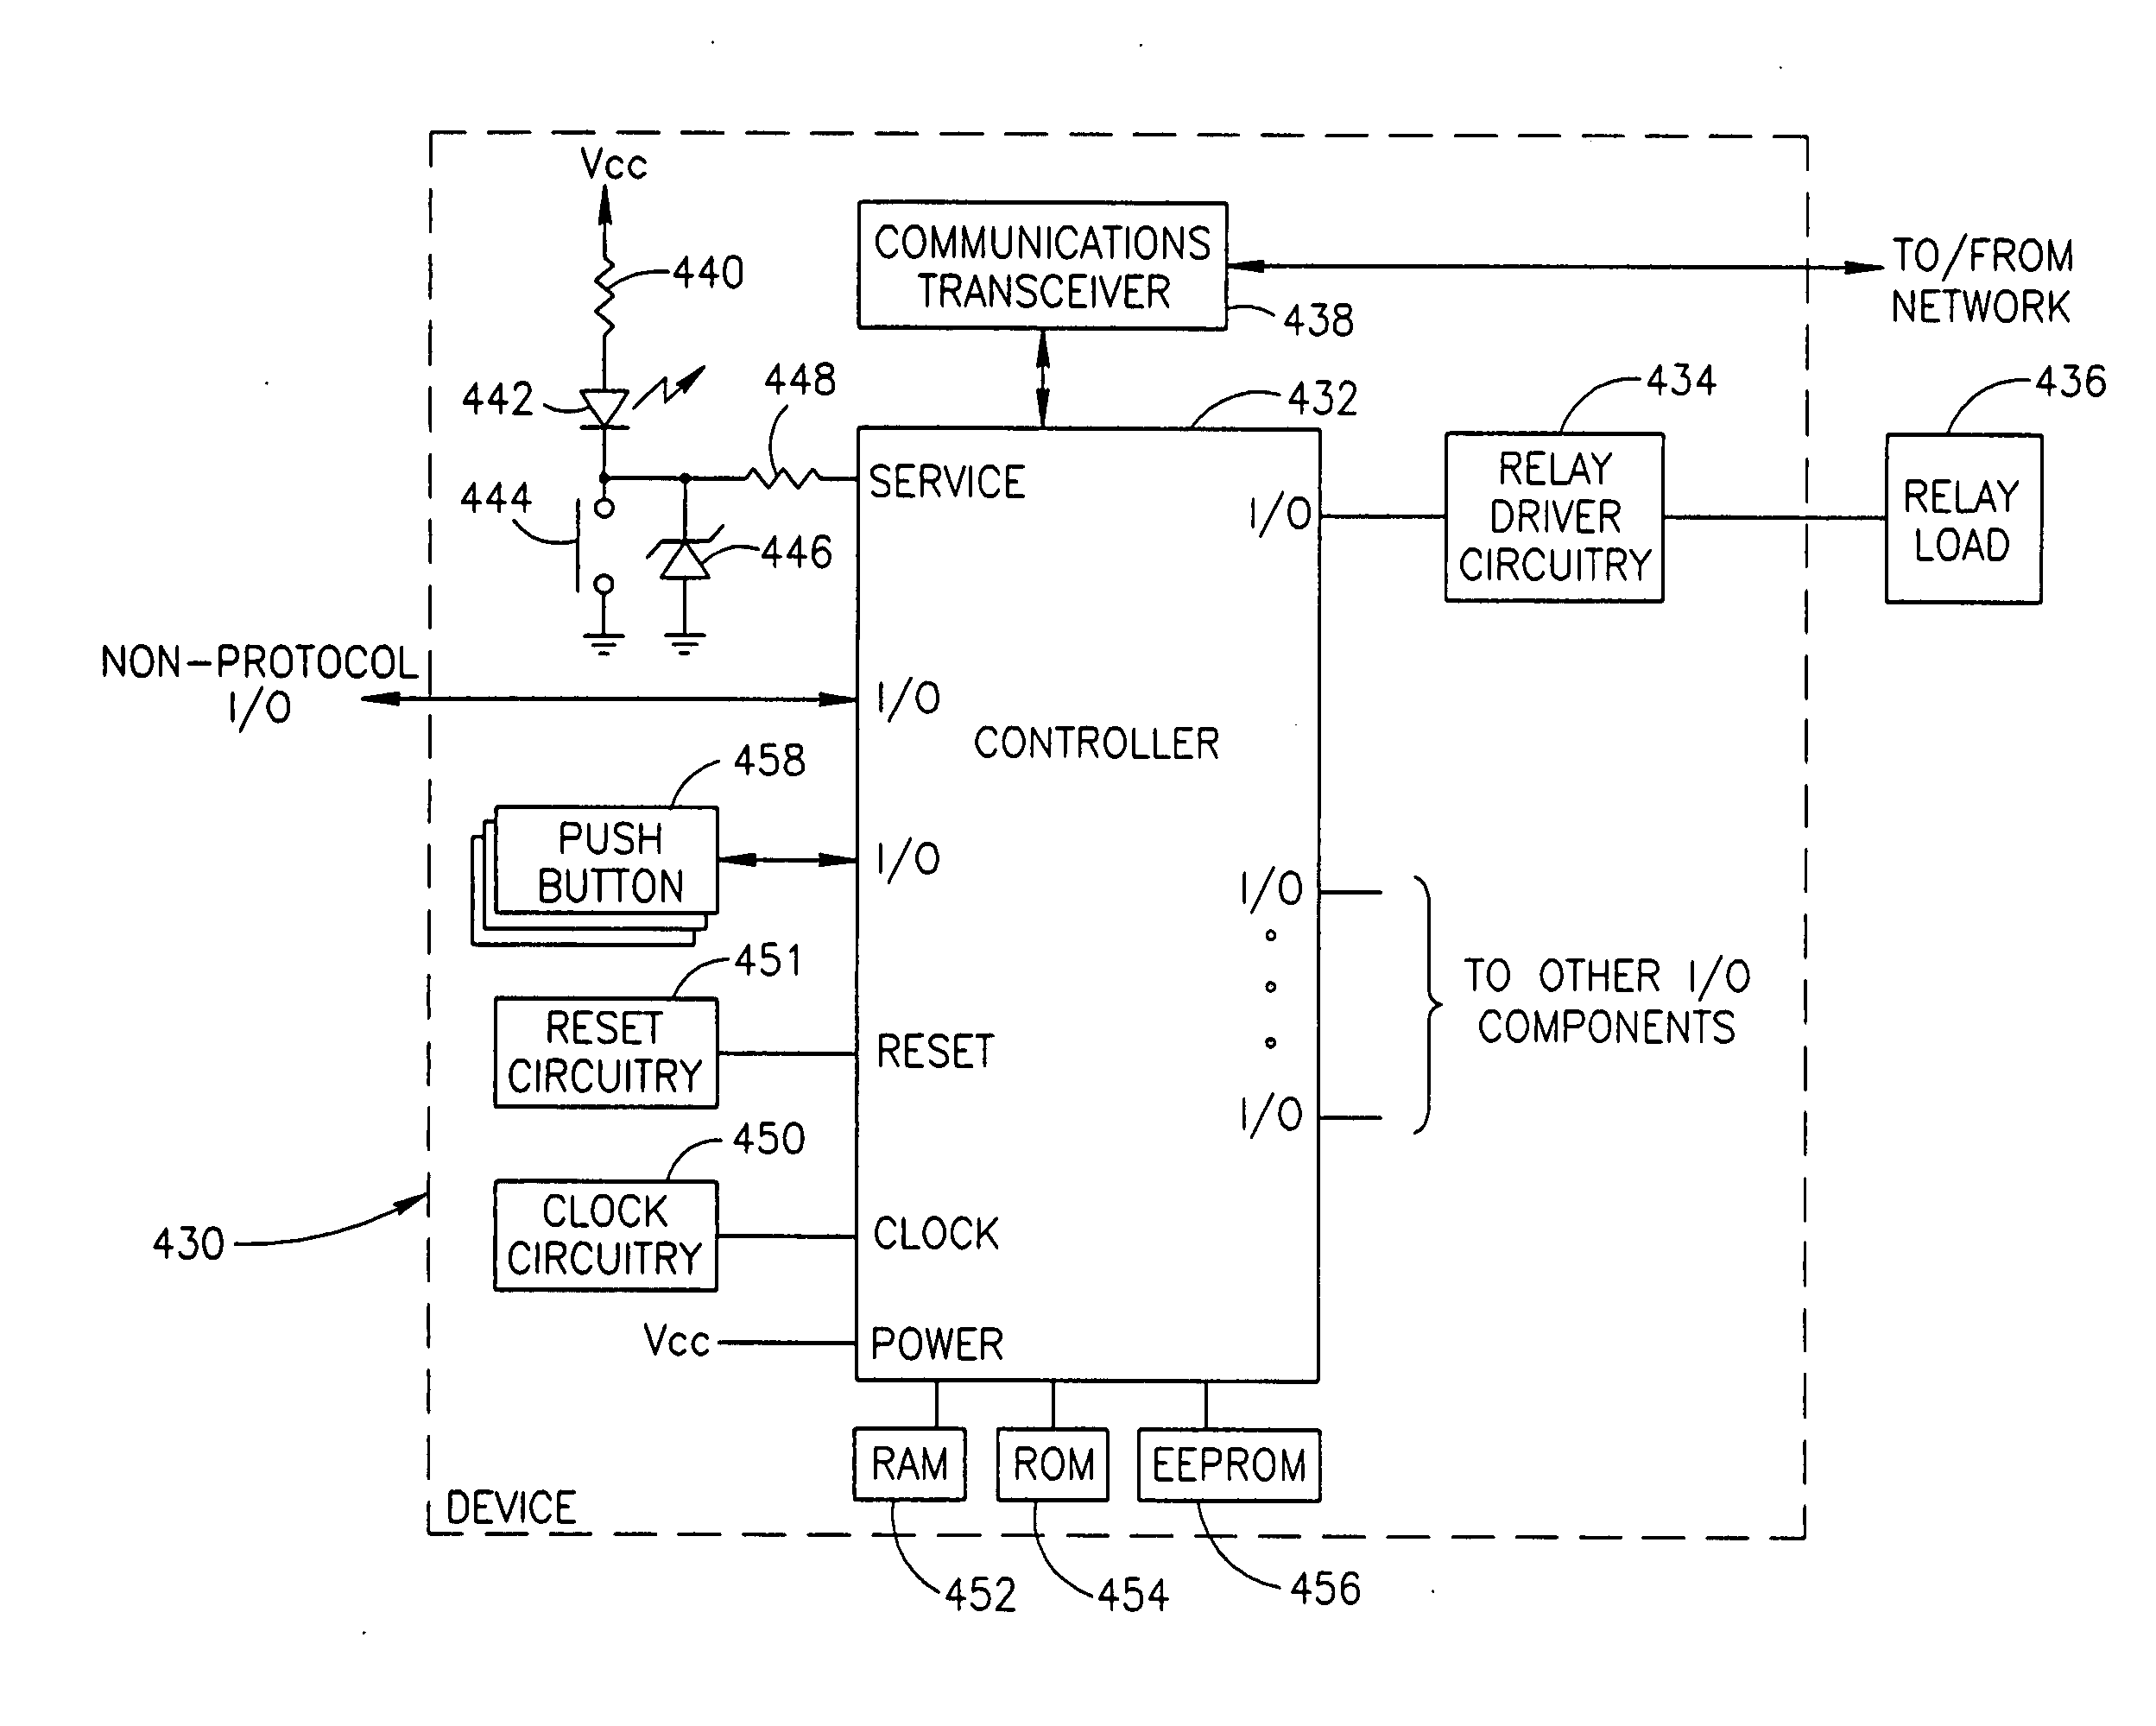 Method of adding a device to a network